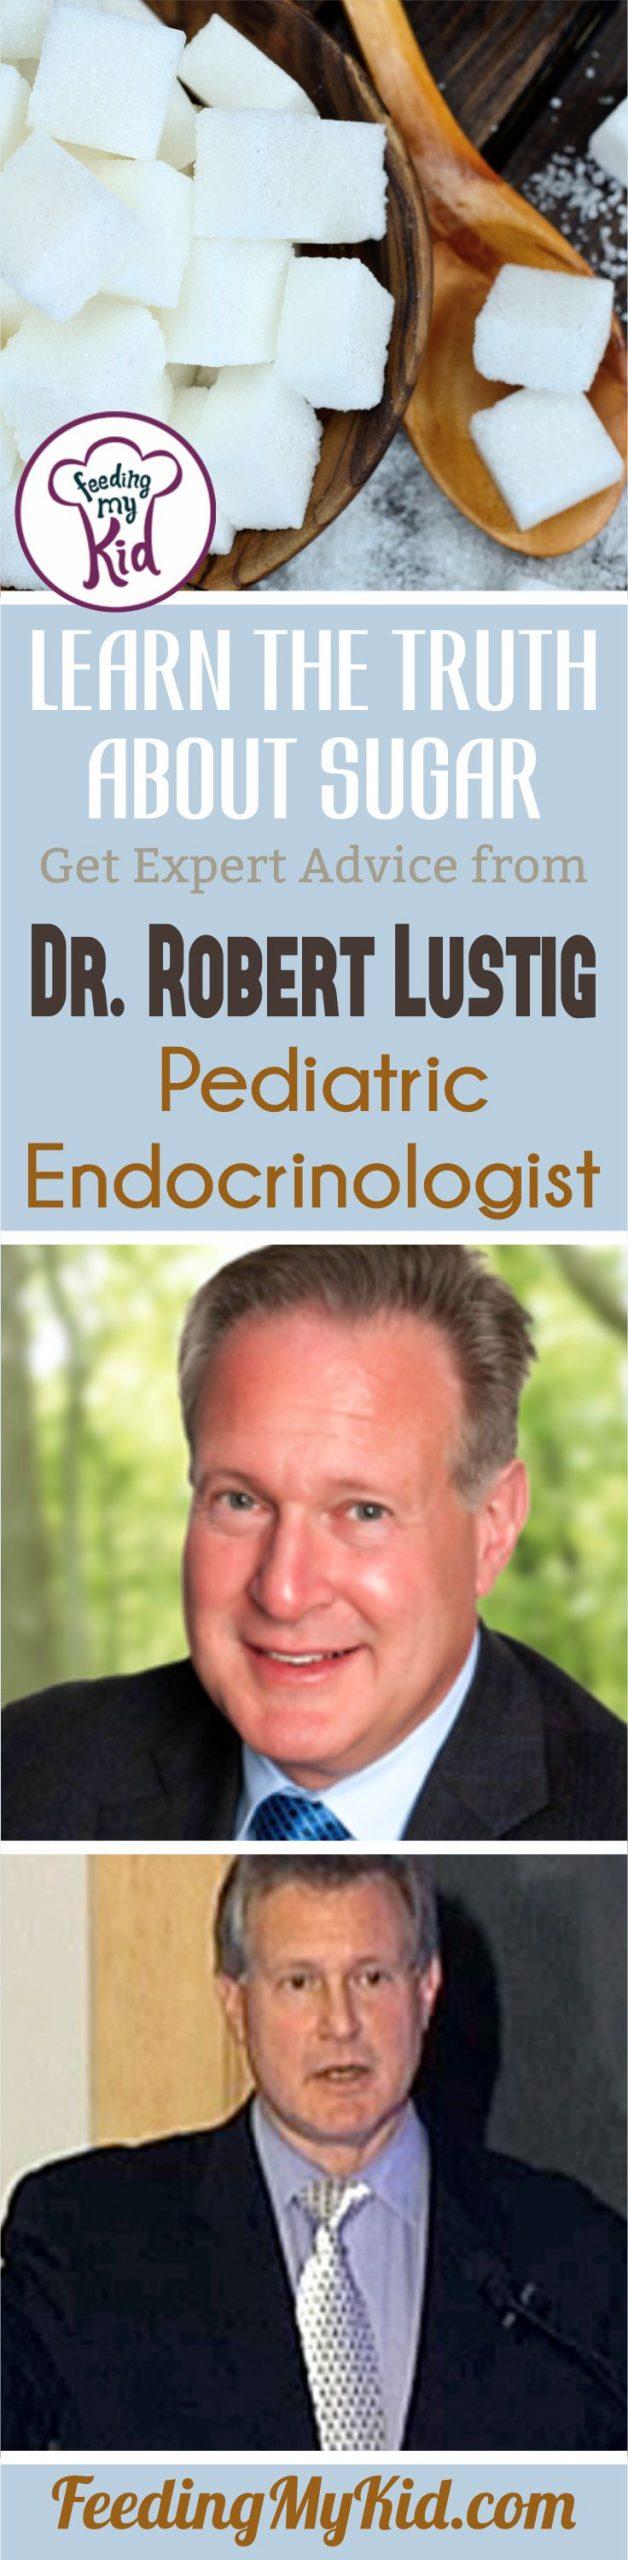 Dr. Robert Lustig, Professor of Pediatrics in the Division of Endocrinology at the University of California, and the truth about sugar.